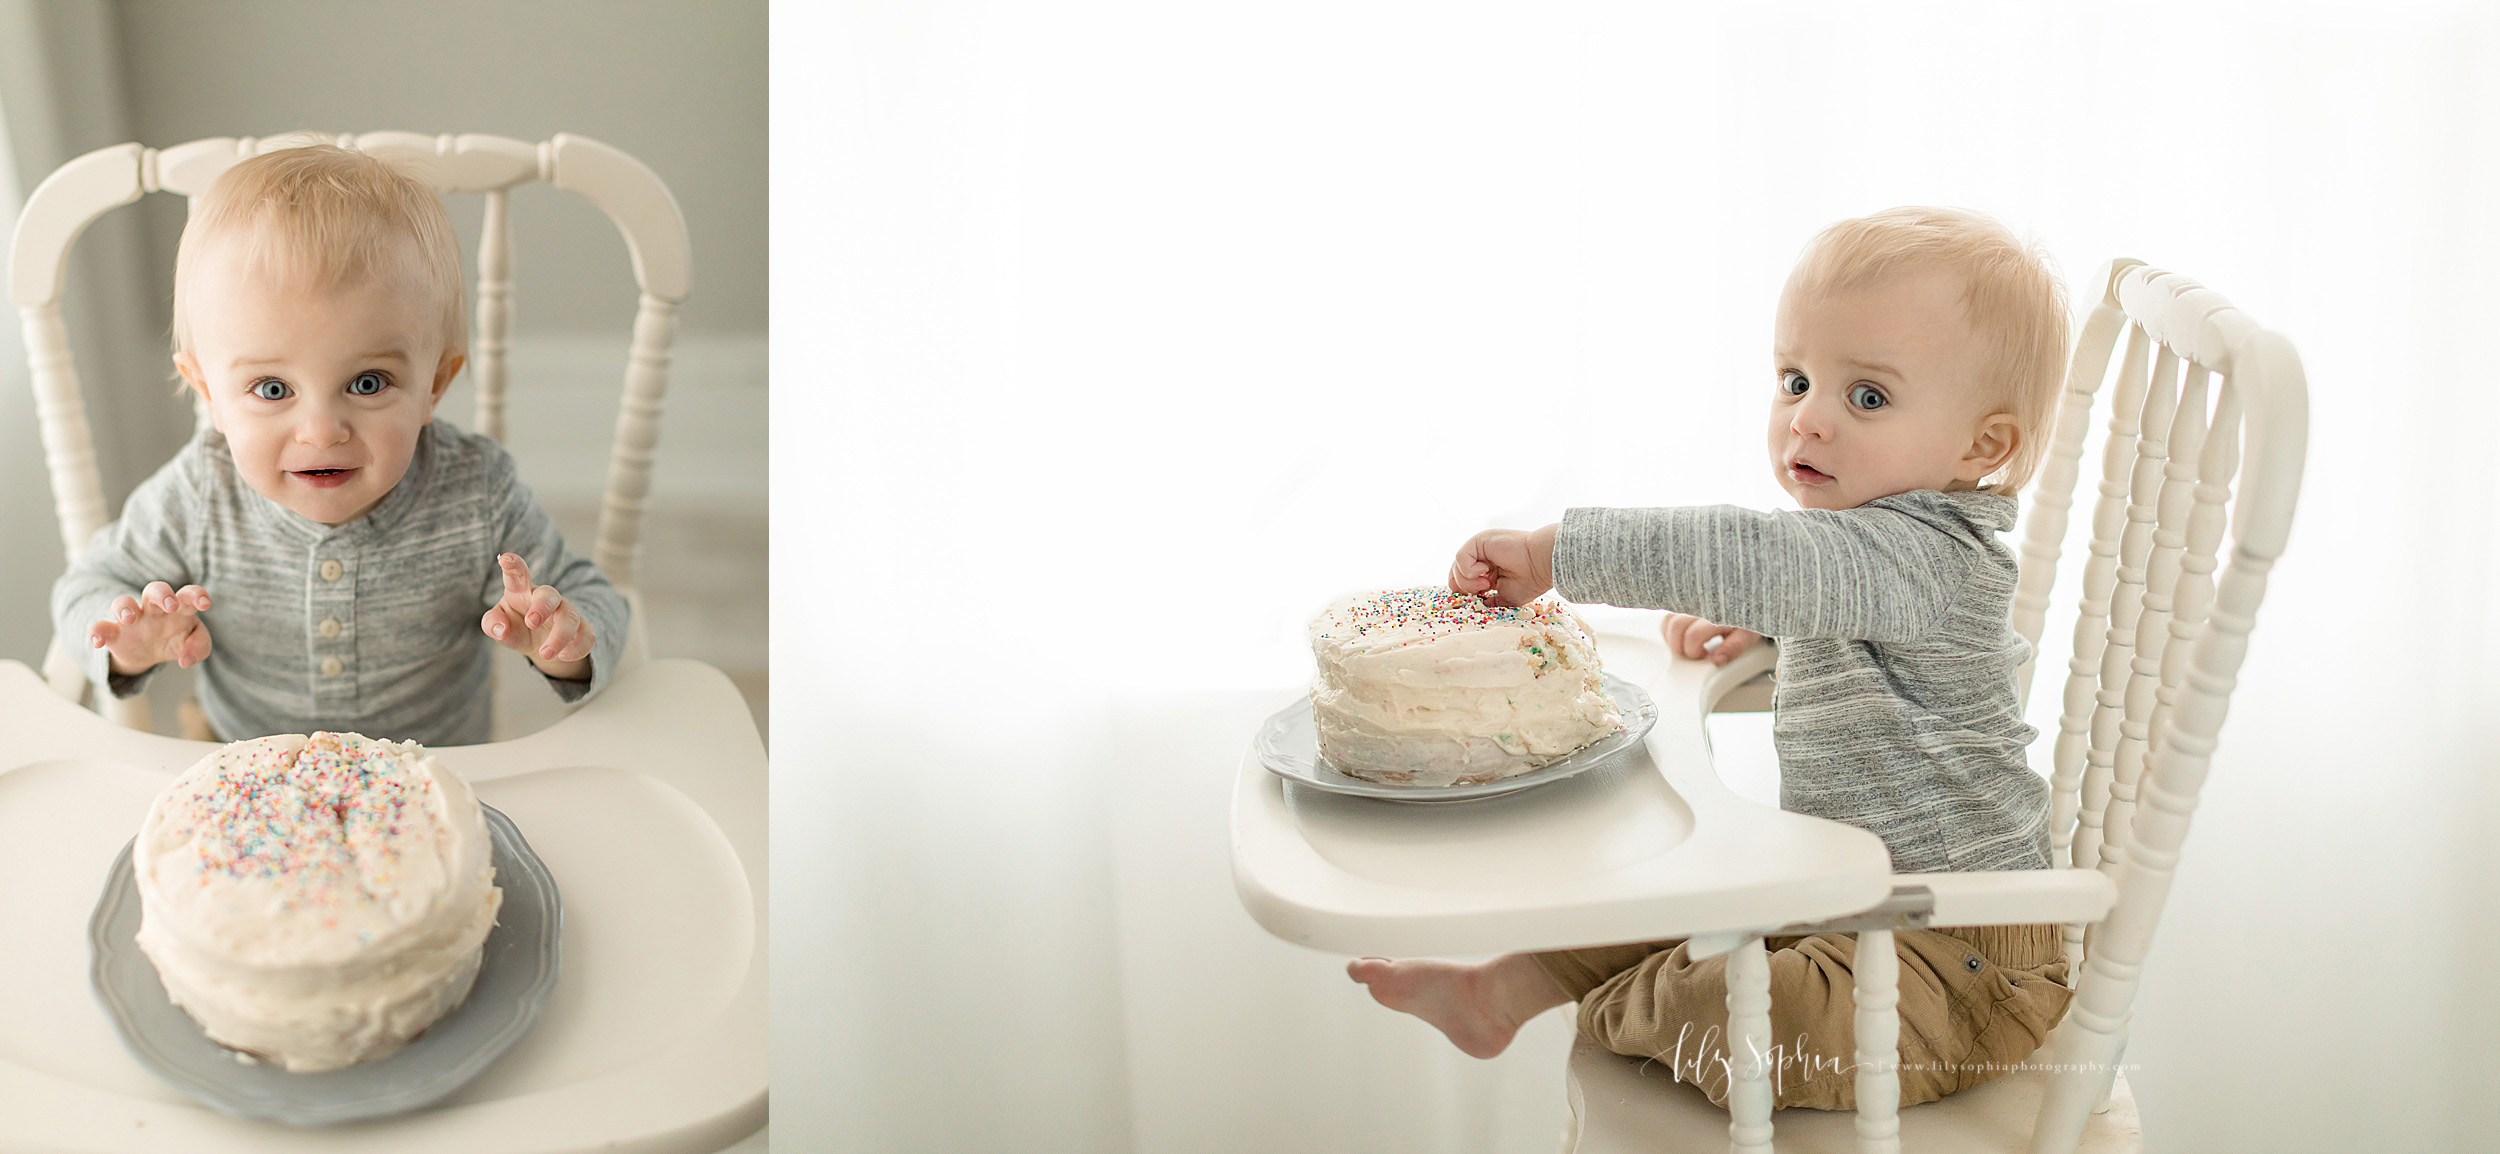  Split image photo of a first birthday boy in a natural light studio in Atlanta with his birthday cake.  The little boy is sitting in an antique high chair He has the cake on the tray.  In one photo you see his excitement as he gets ready to dive in.